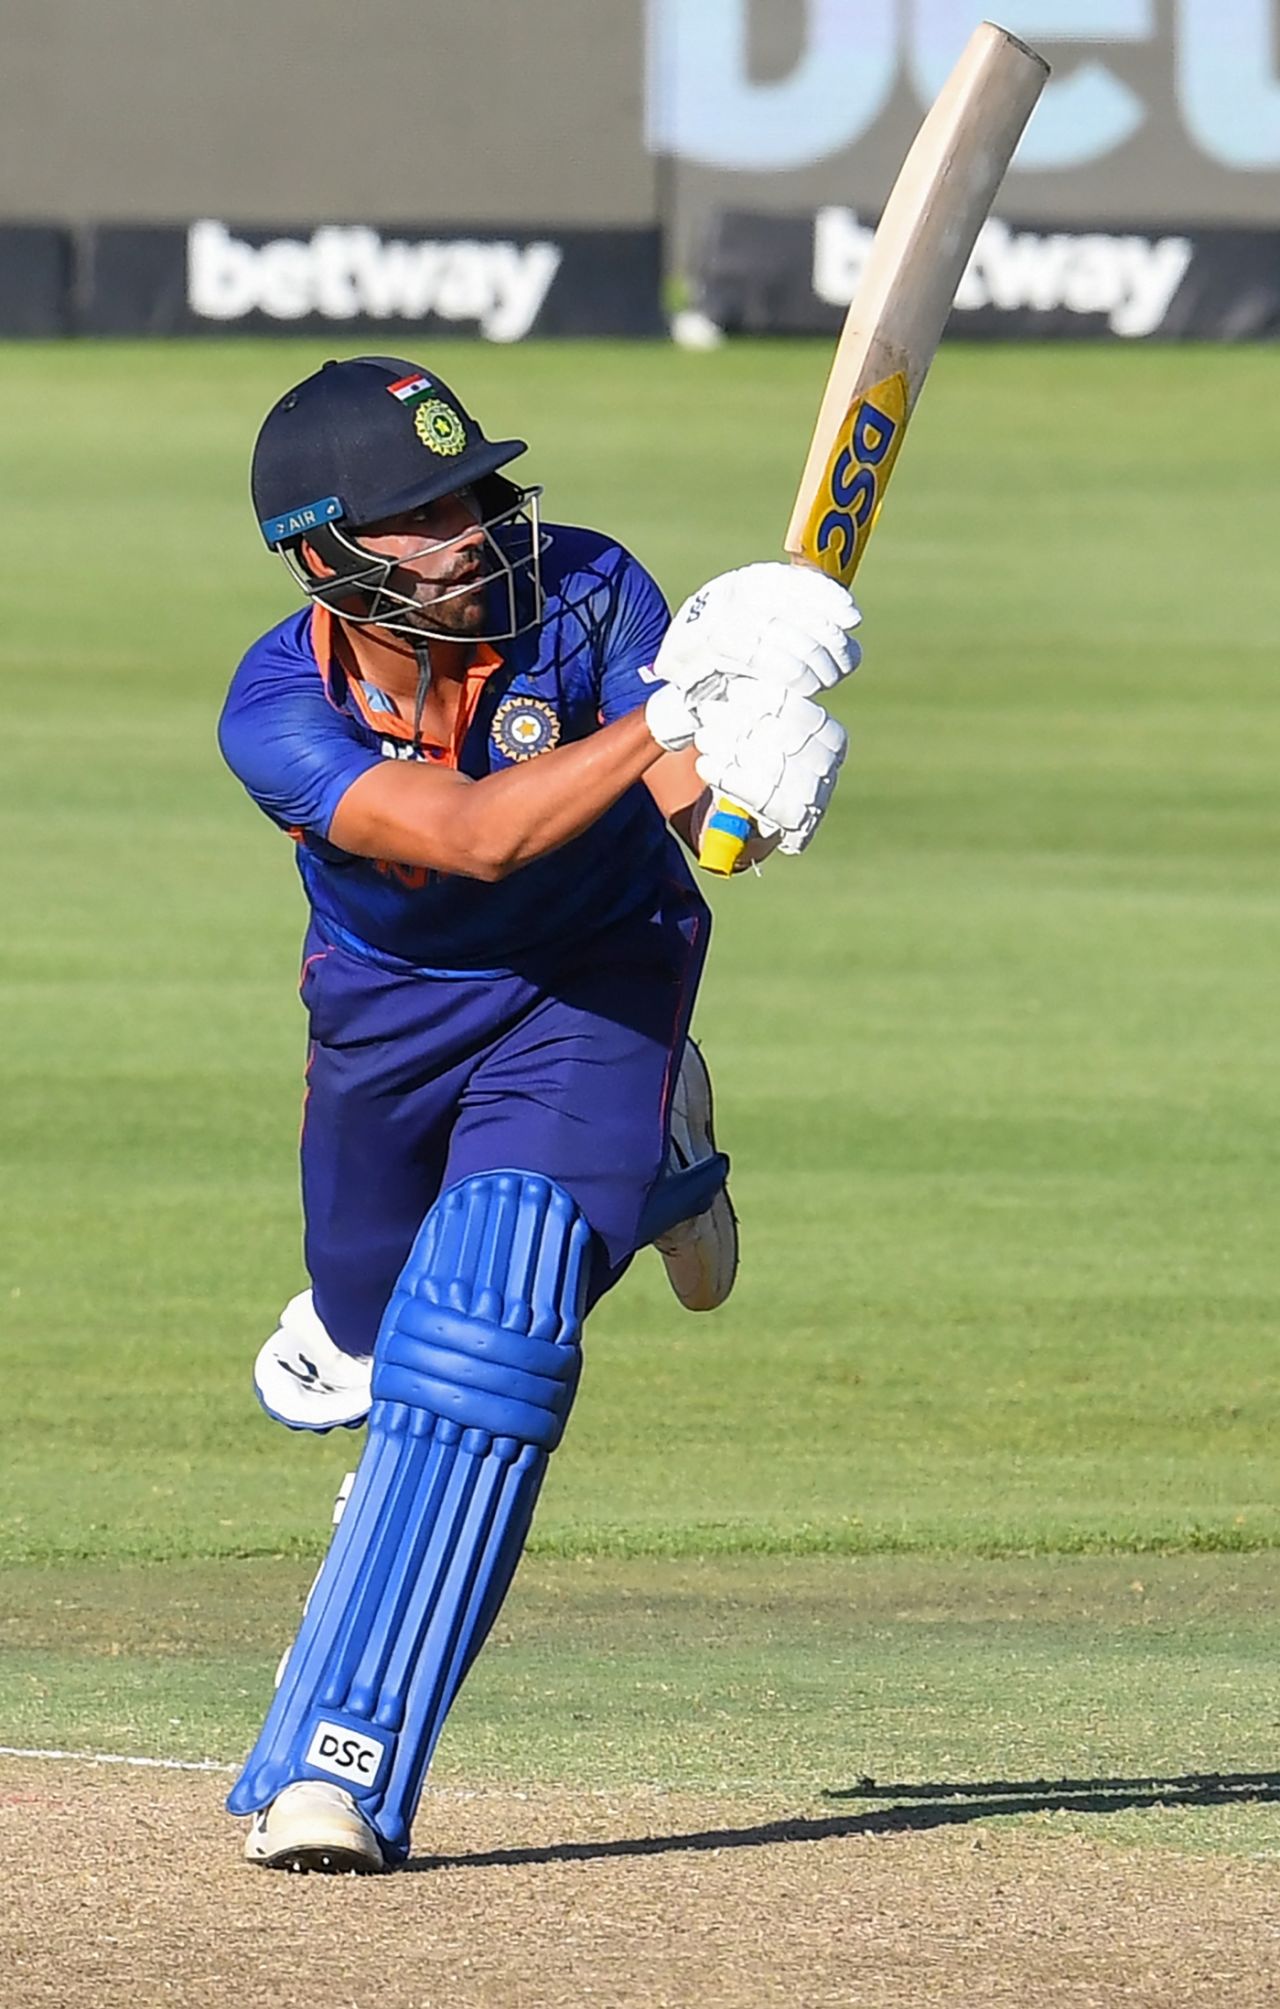 Deepak Chahar hit a 31-ball fifty, South Africa vs India, 3rd ODI, Cape Town, January 23, 2022